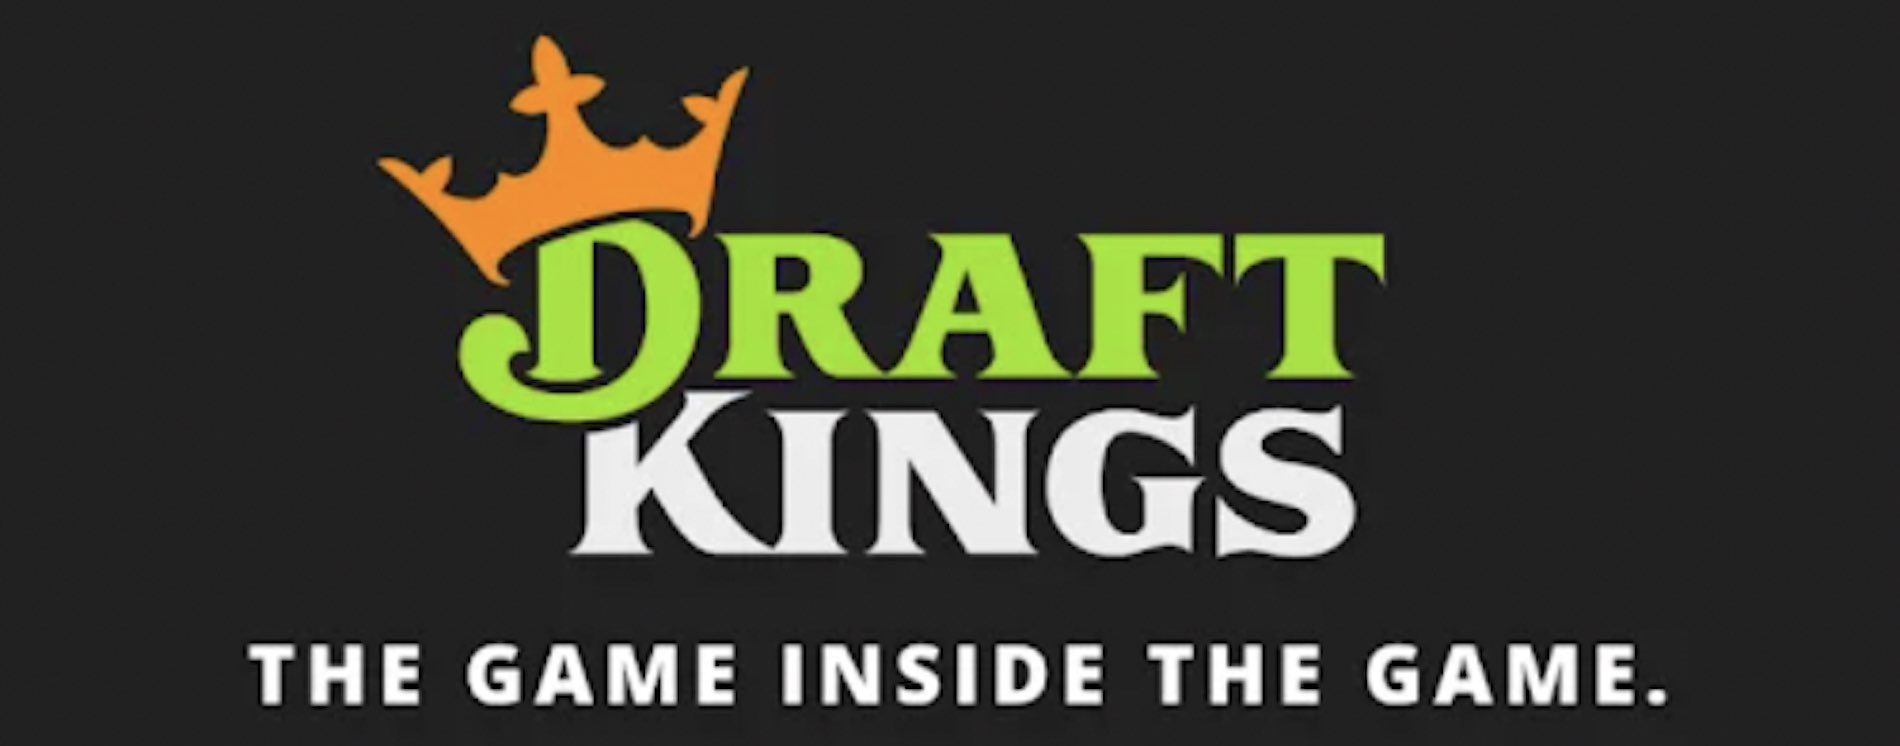 Draft Kings Ontario License Approved